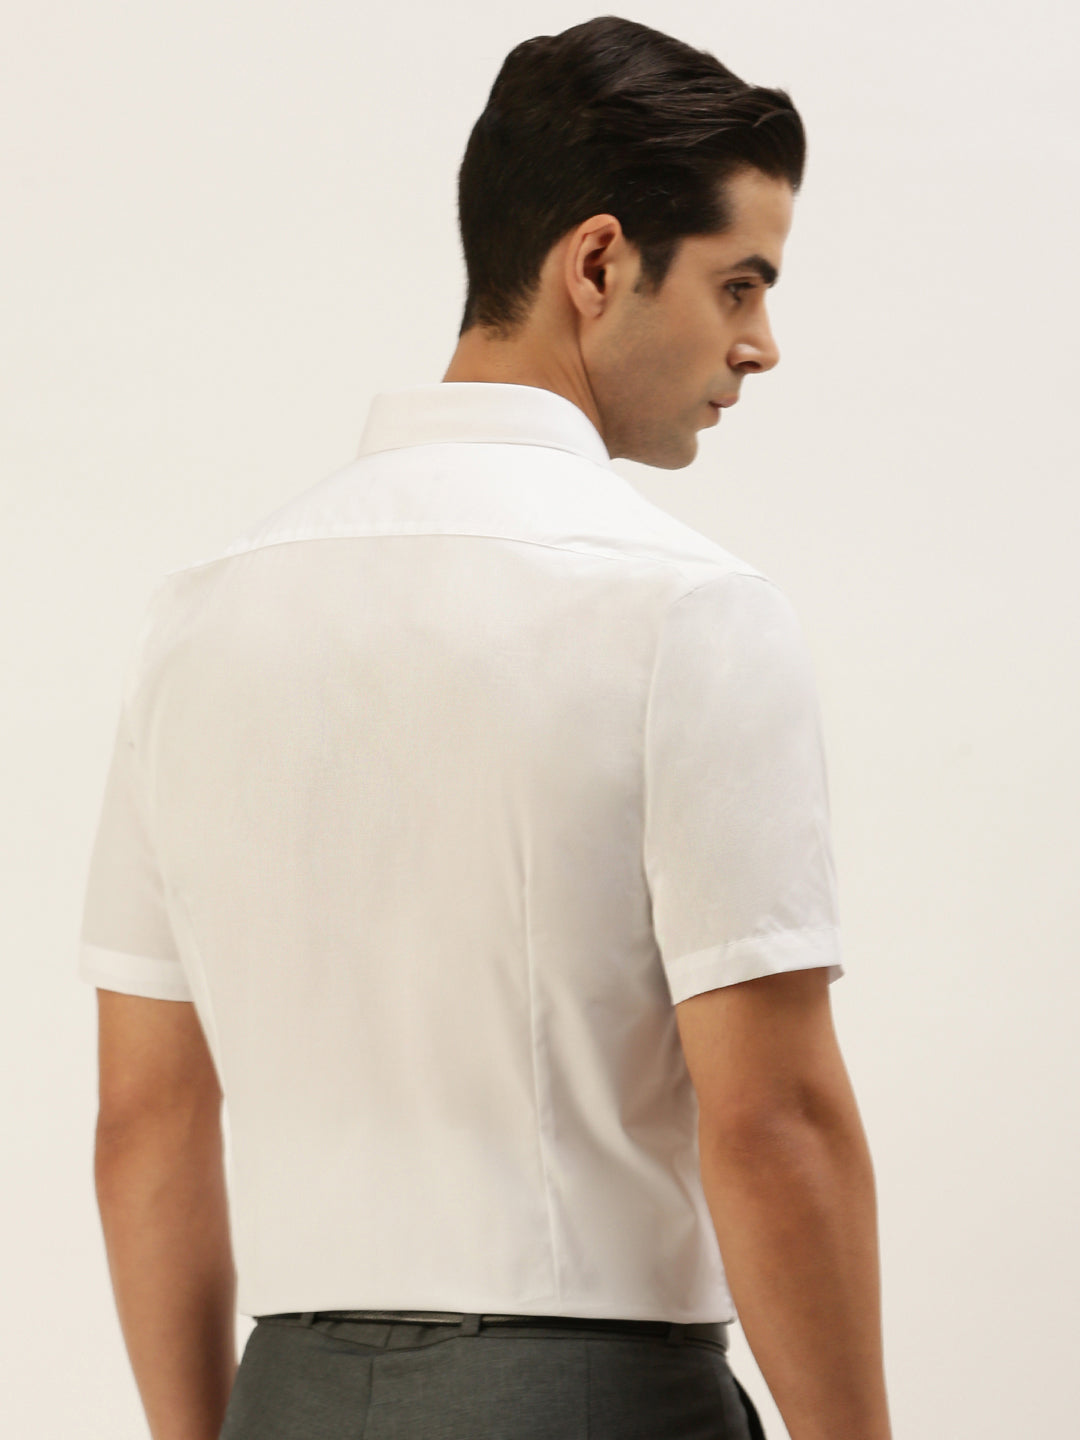 Mens Smart Fit 100% Cotton White Shirt Half Sleeves First Look -Back view